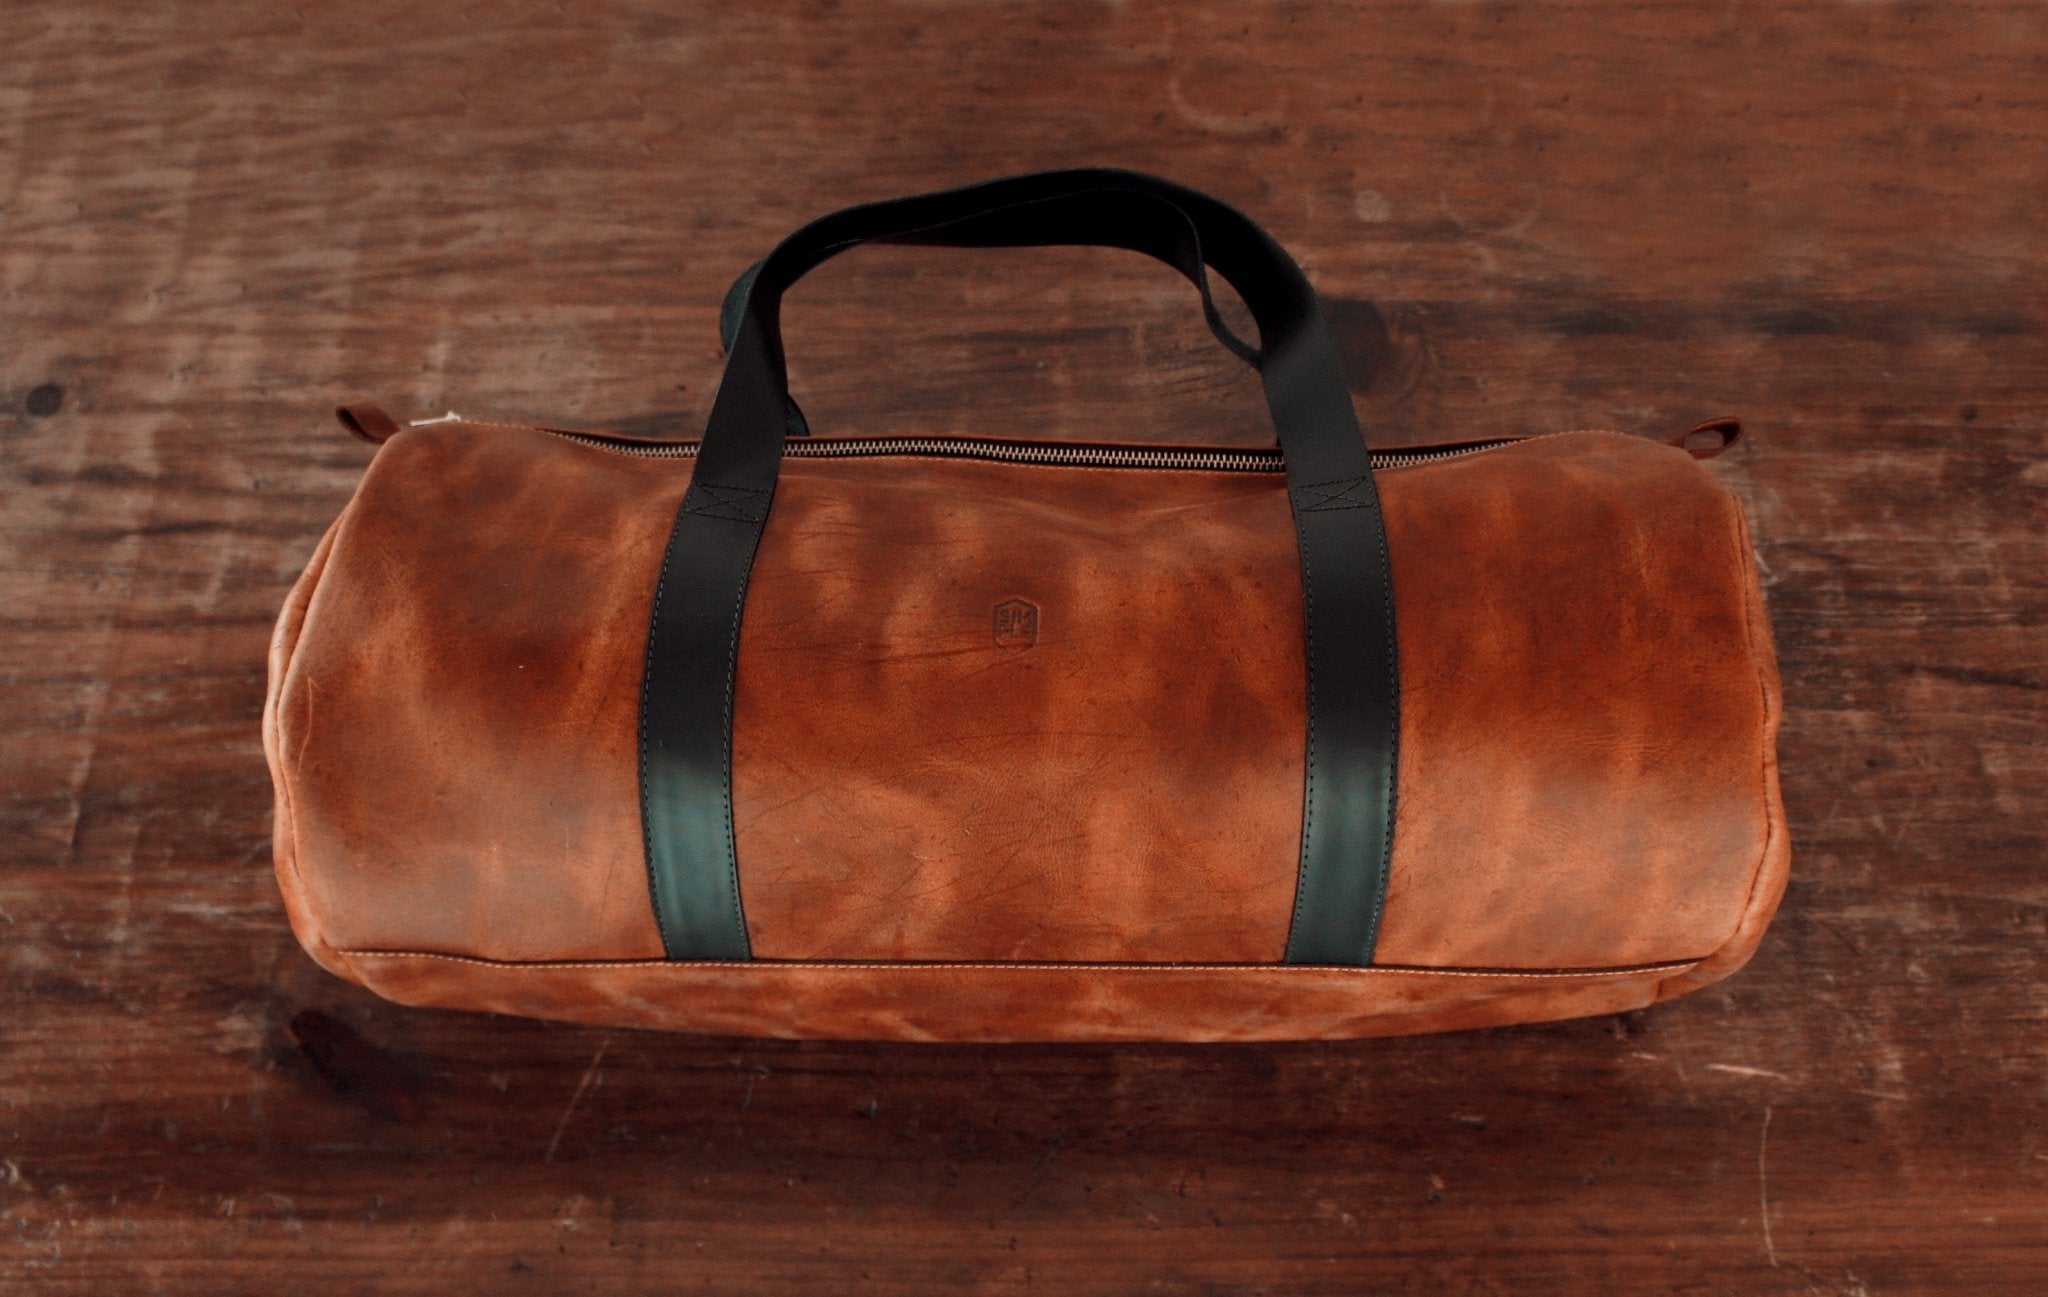 Simple Leather duffle bag, brown with black handles